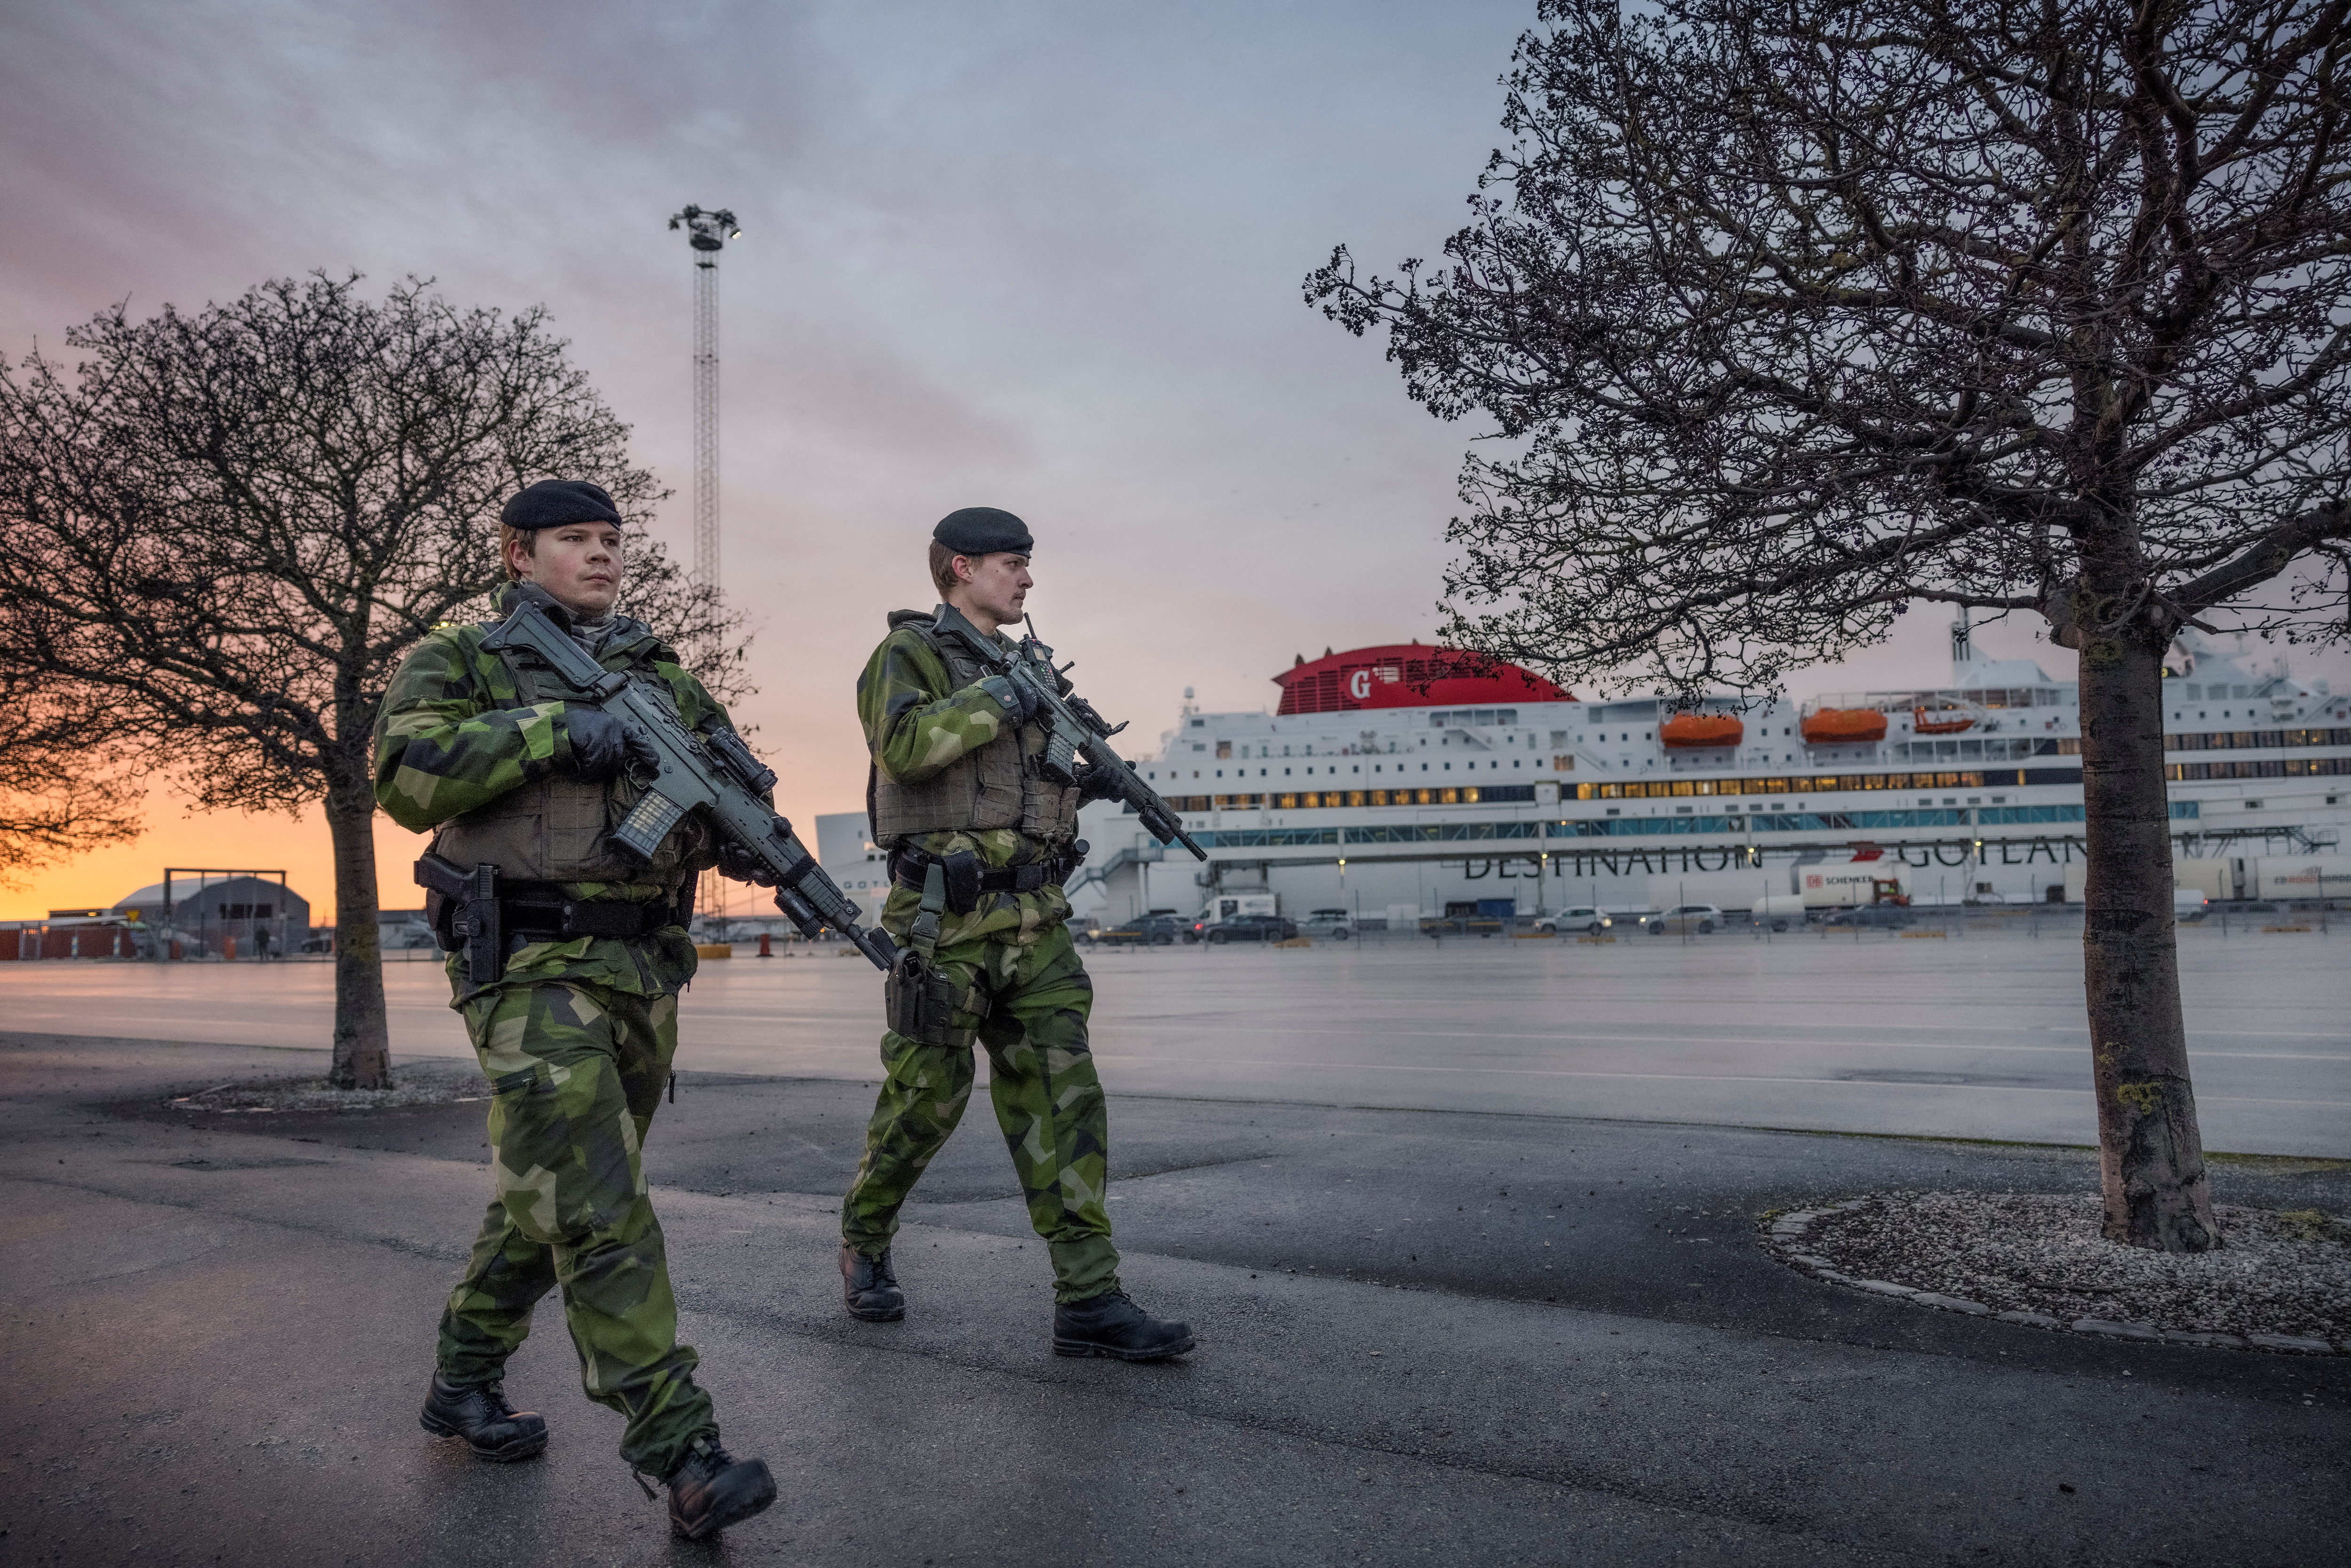 Soldiers from Gotland's regiment patrol Visby harbour, amid increased tensions between NATO and Russia over Ukraine, on the Swedish island of Gotland, Sweden, 13 January 2022. Picture taken January 13, 2022.  TT News Agency/Karl Melander via REUTERS   